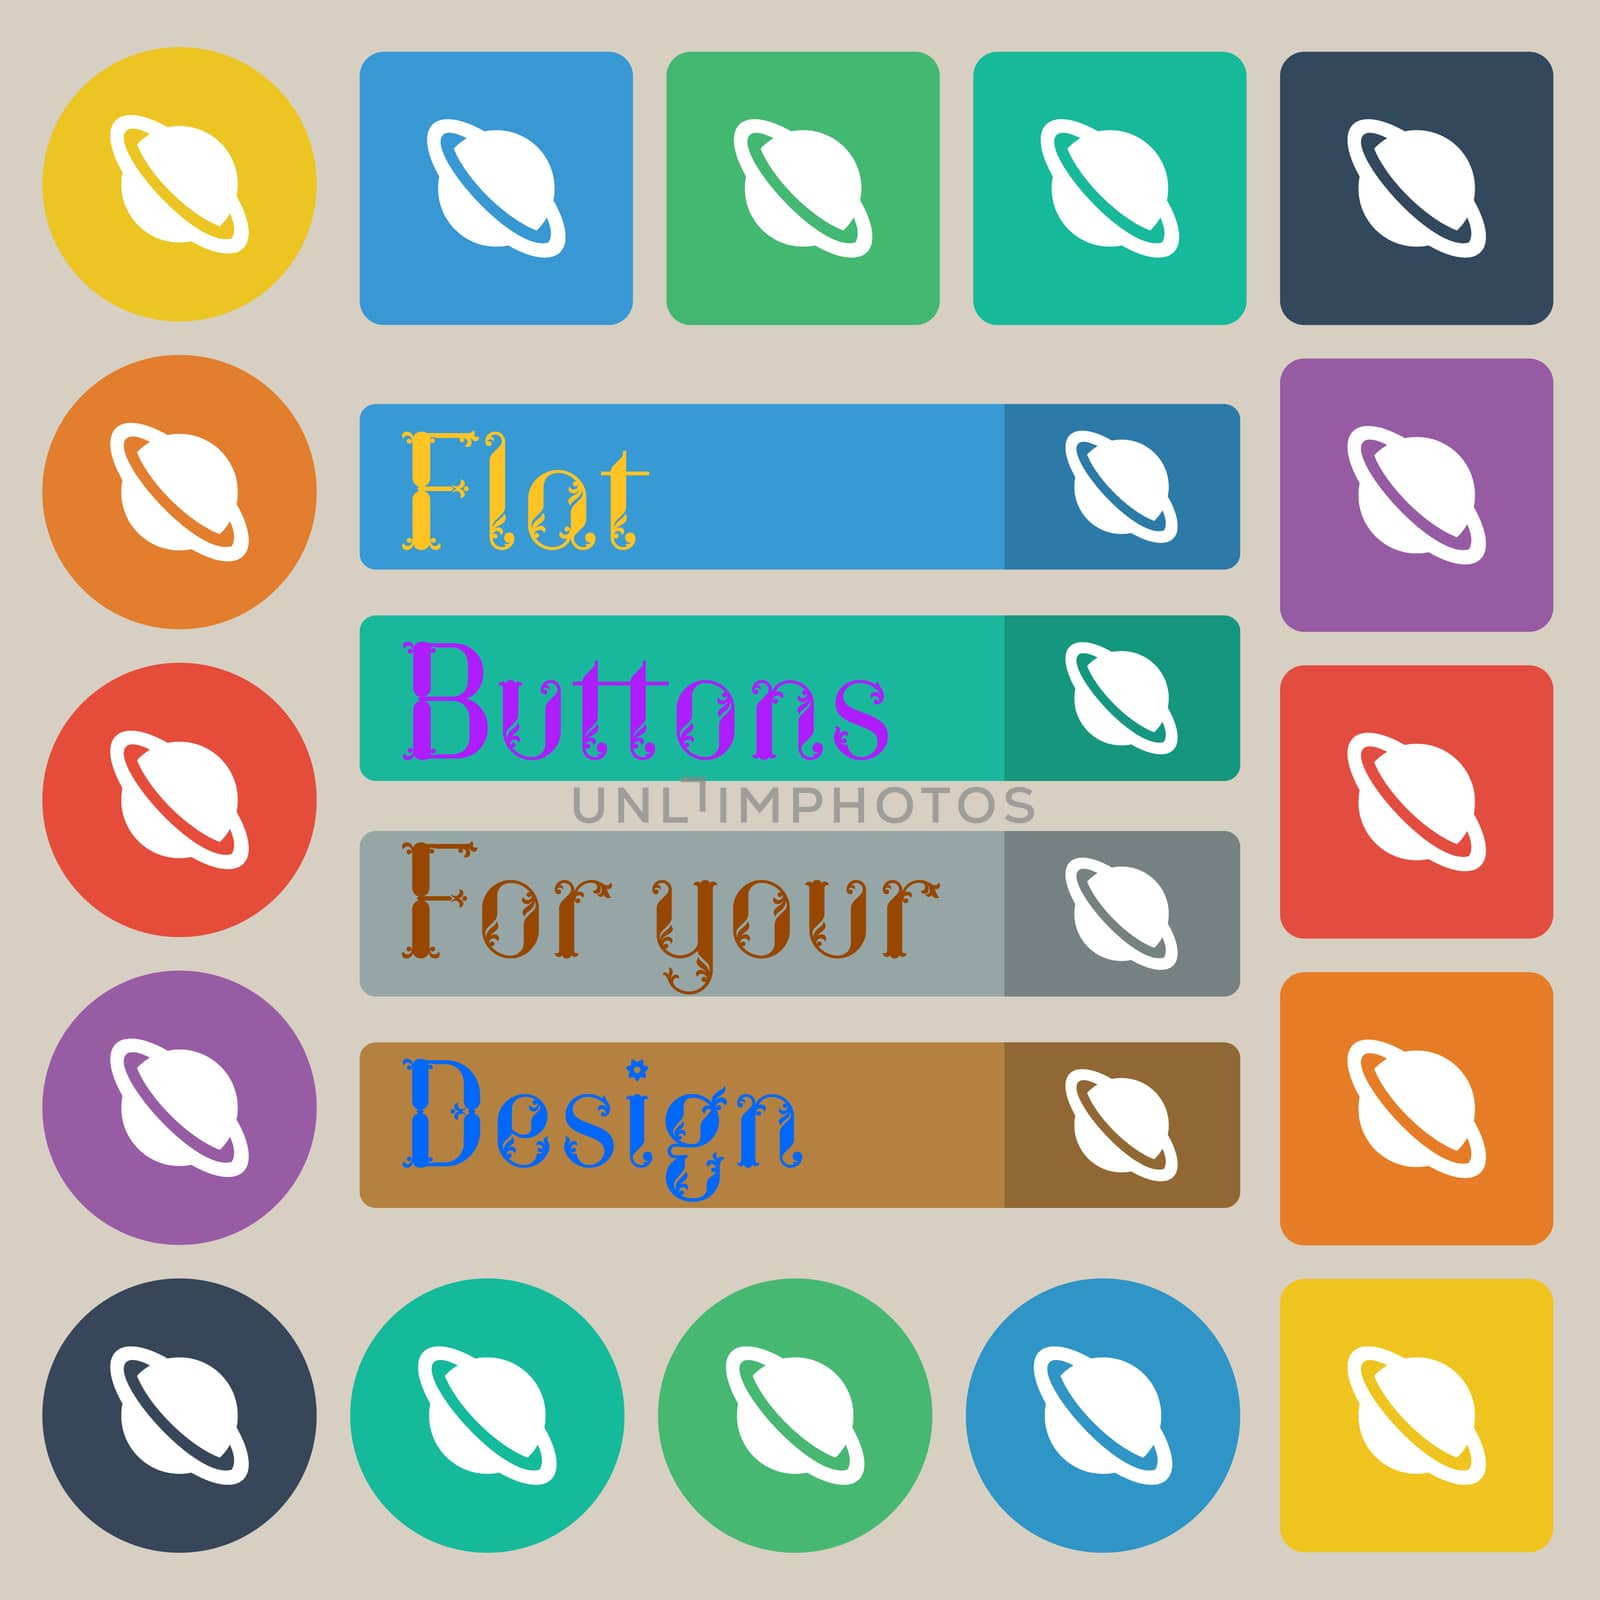 Jupiter planet icon sign. Set of twenty colored flat, round, square and rectangular buttons. illustration